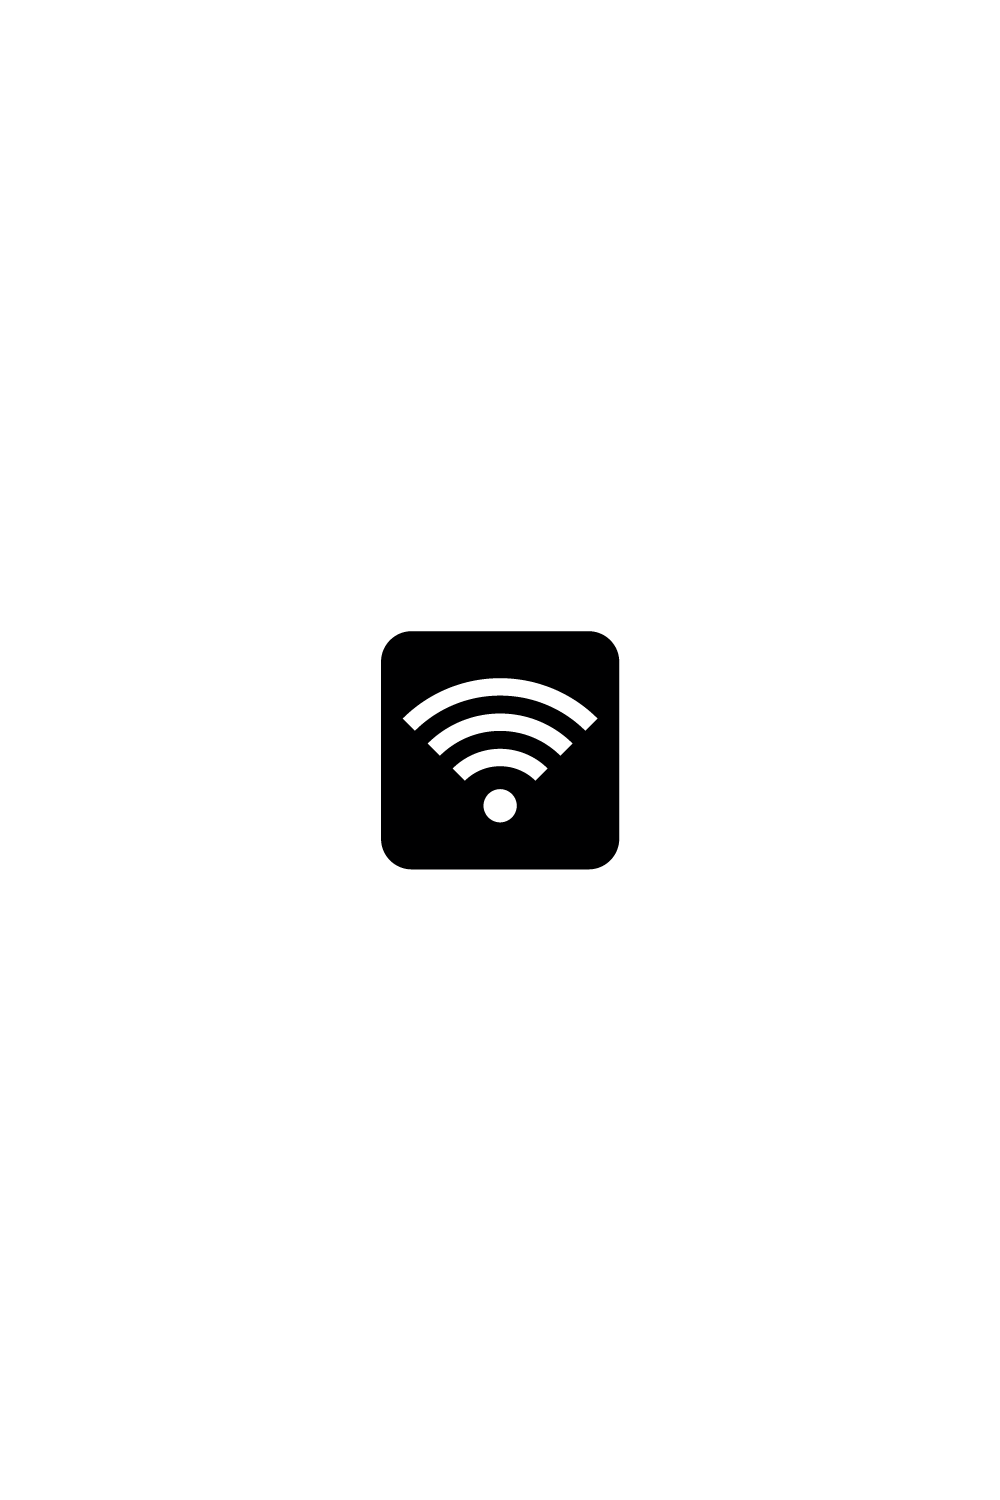 Wifi wireless internet signal flat icon for apps pinterest preview image.